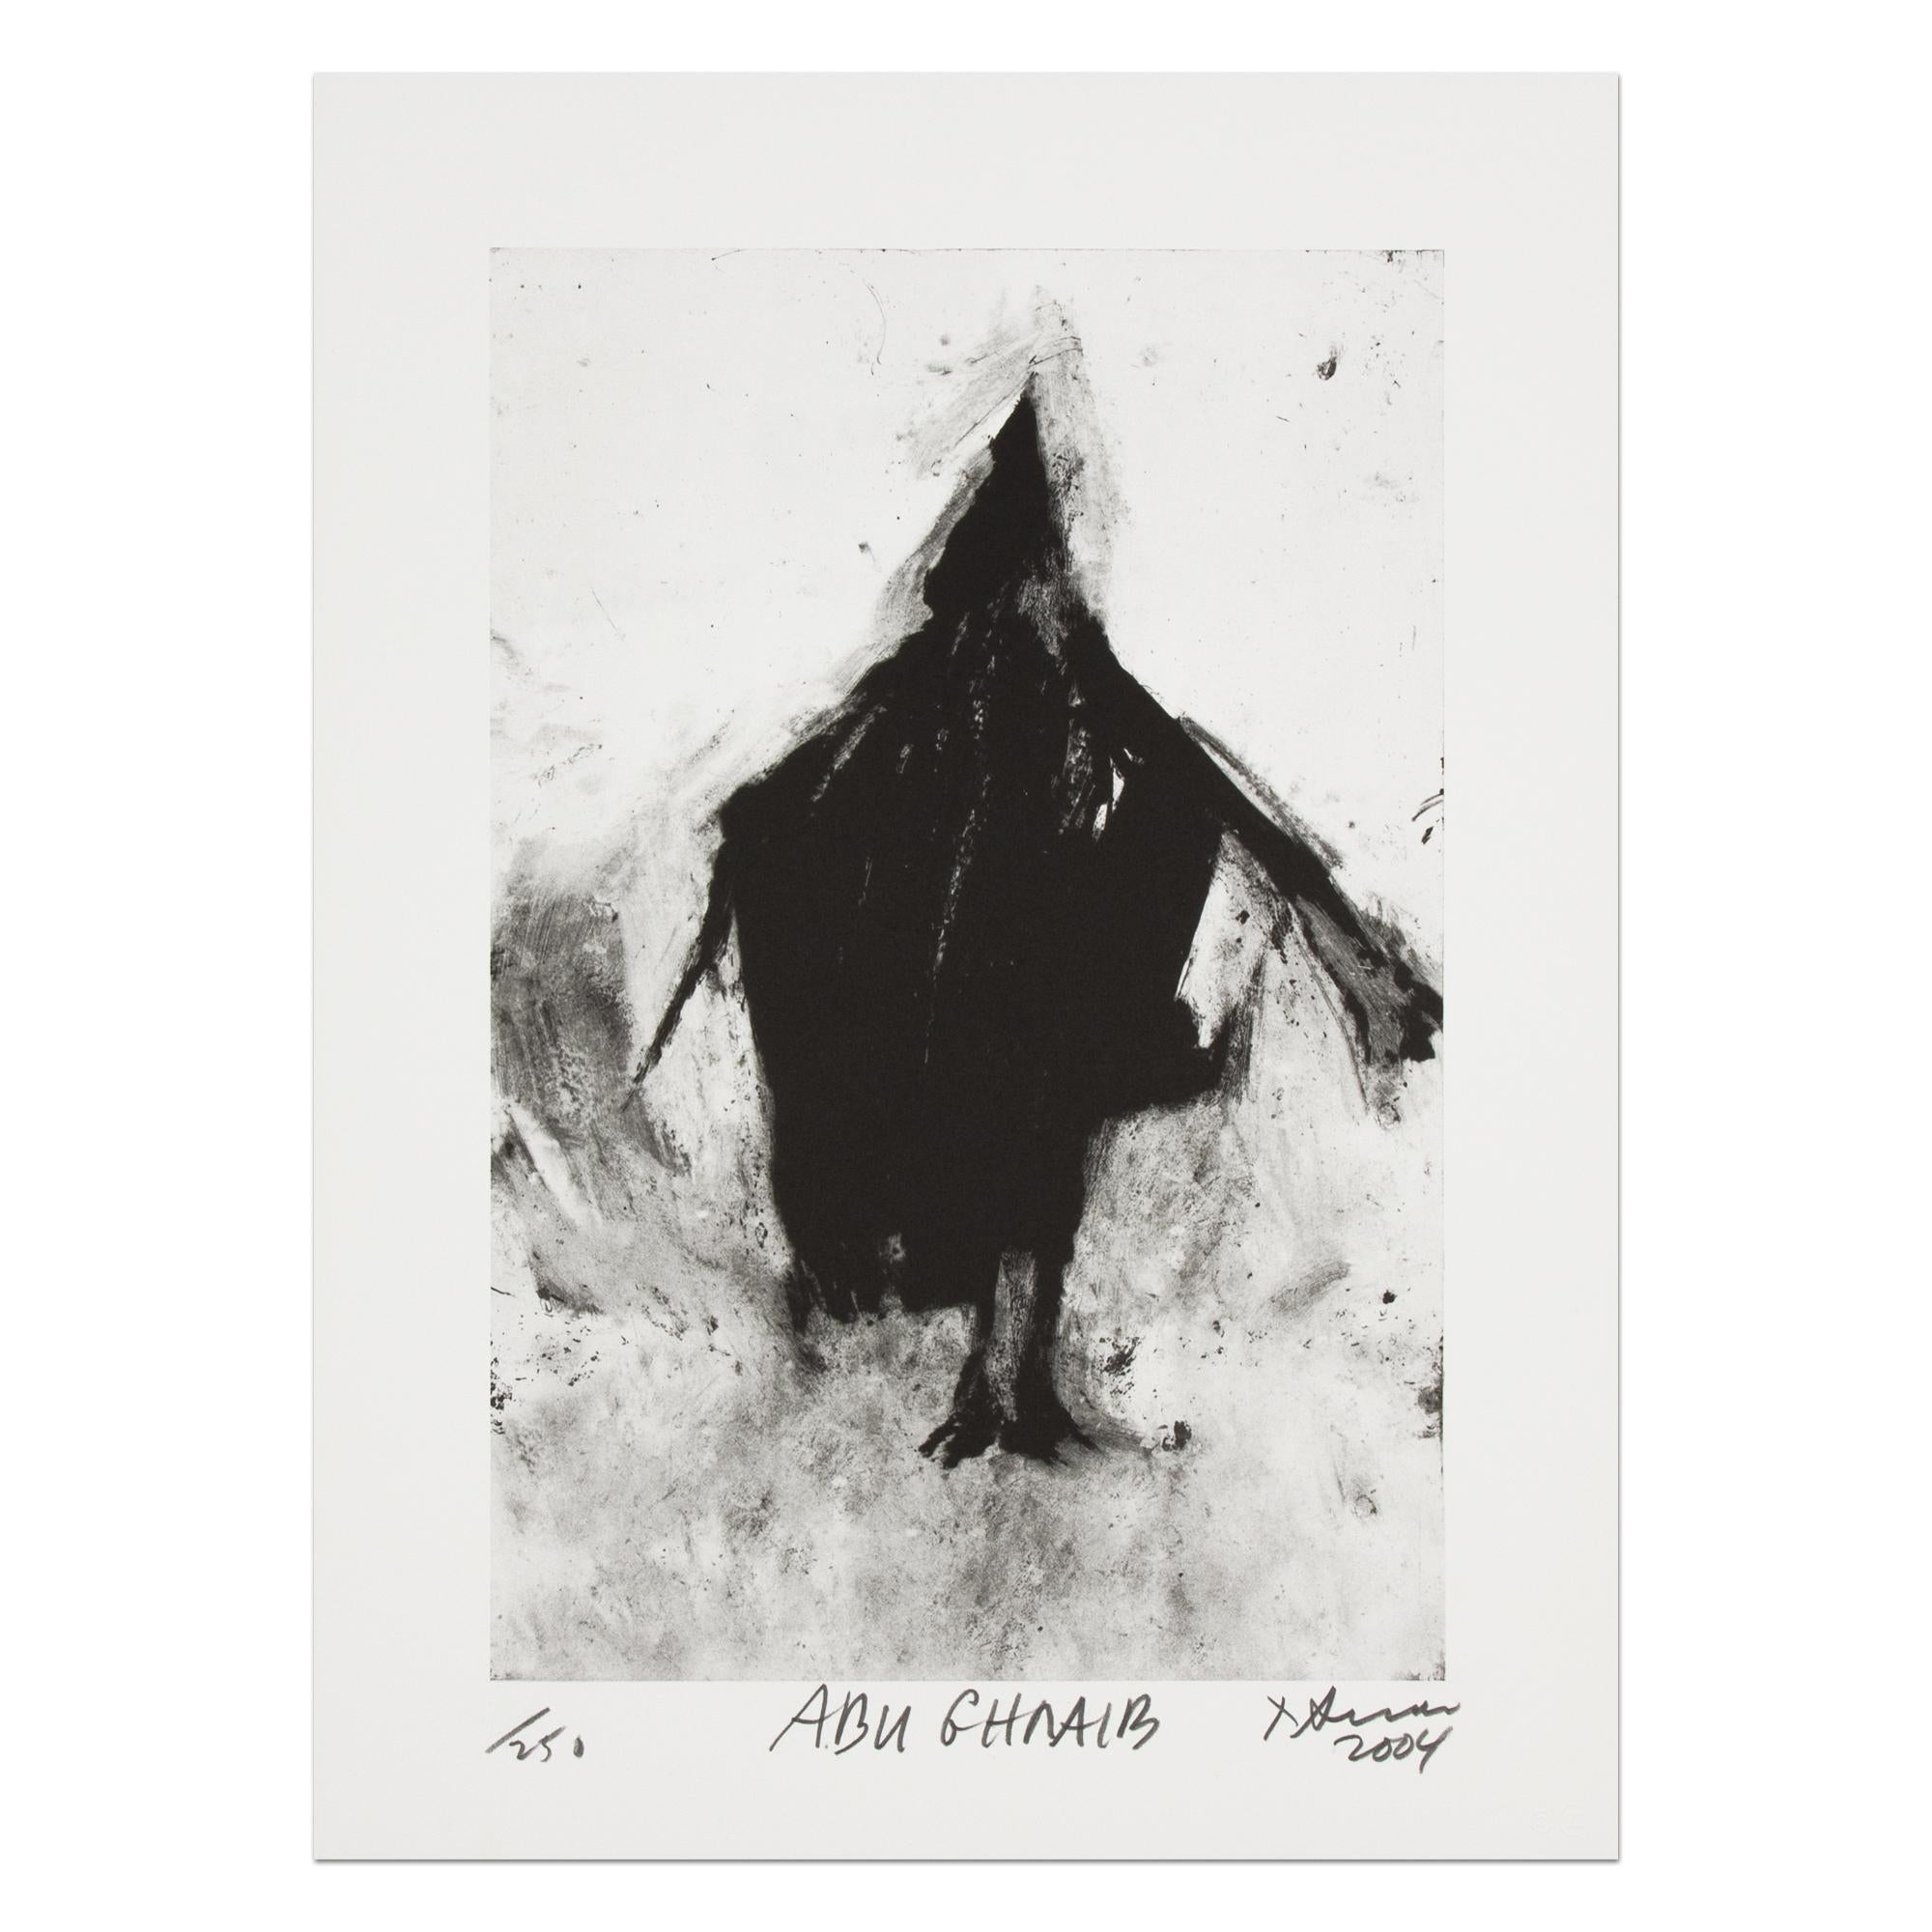 Richard Serra (American, b. 1939)
Abu Ghraib, 2004
Medium: Lithograph with pencil inscription
Dimensions: 50.80 x 36.83 cm (20 x 14 1/2 in)
Edition of 250: Hand-signed and numbered
Condition: Mint